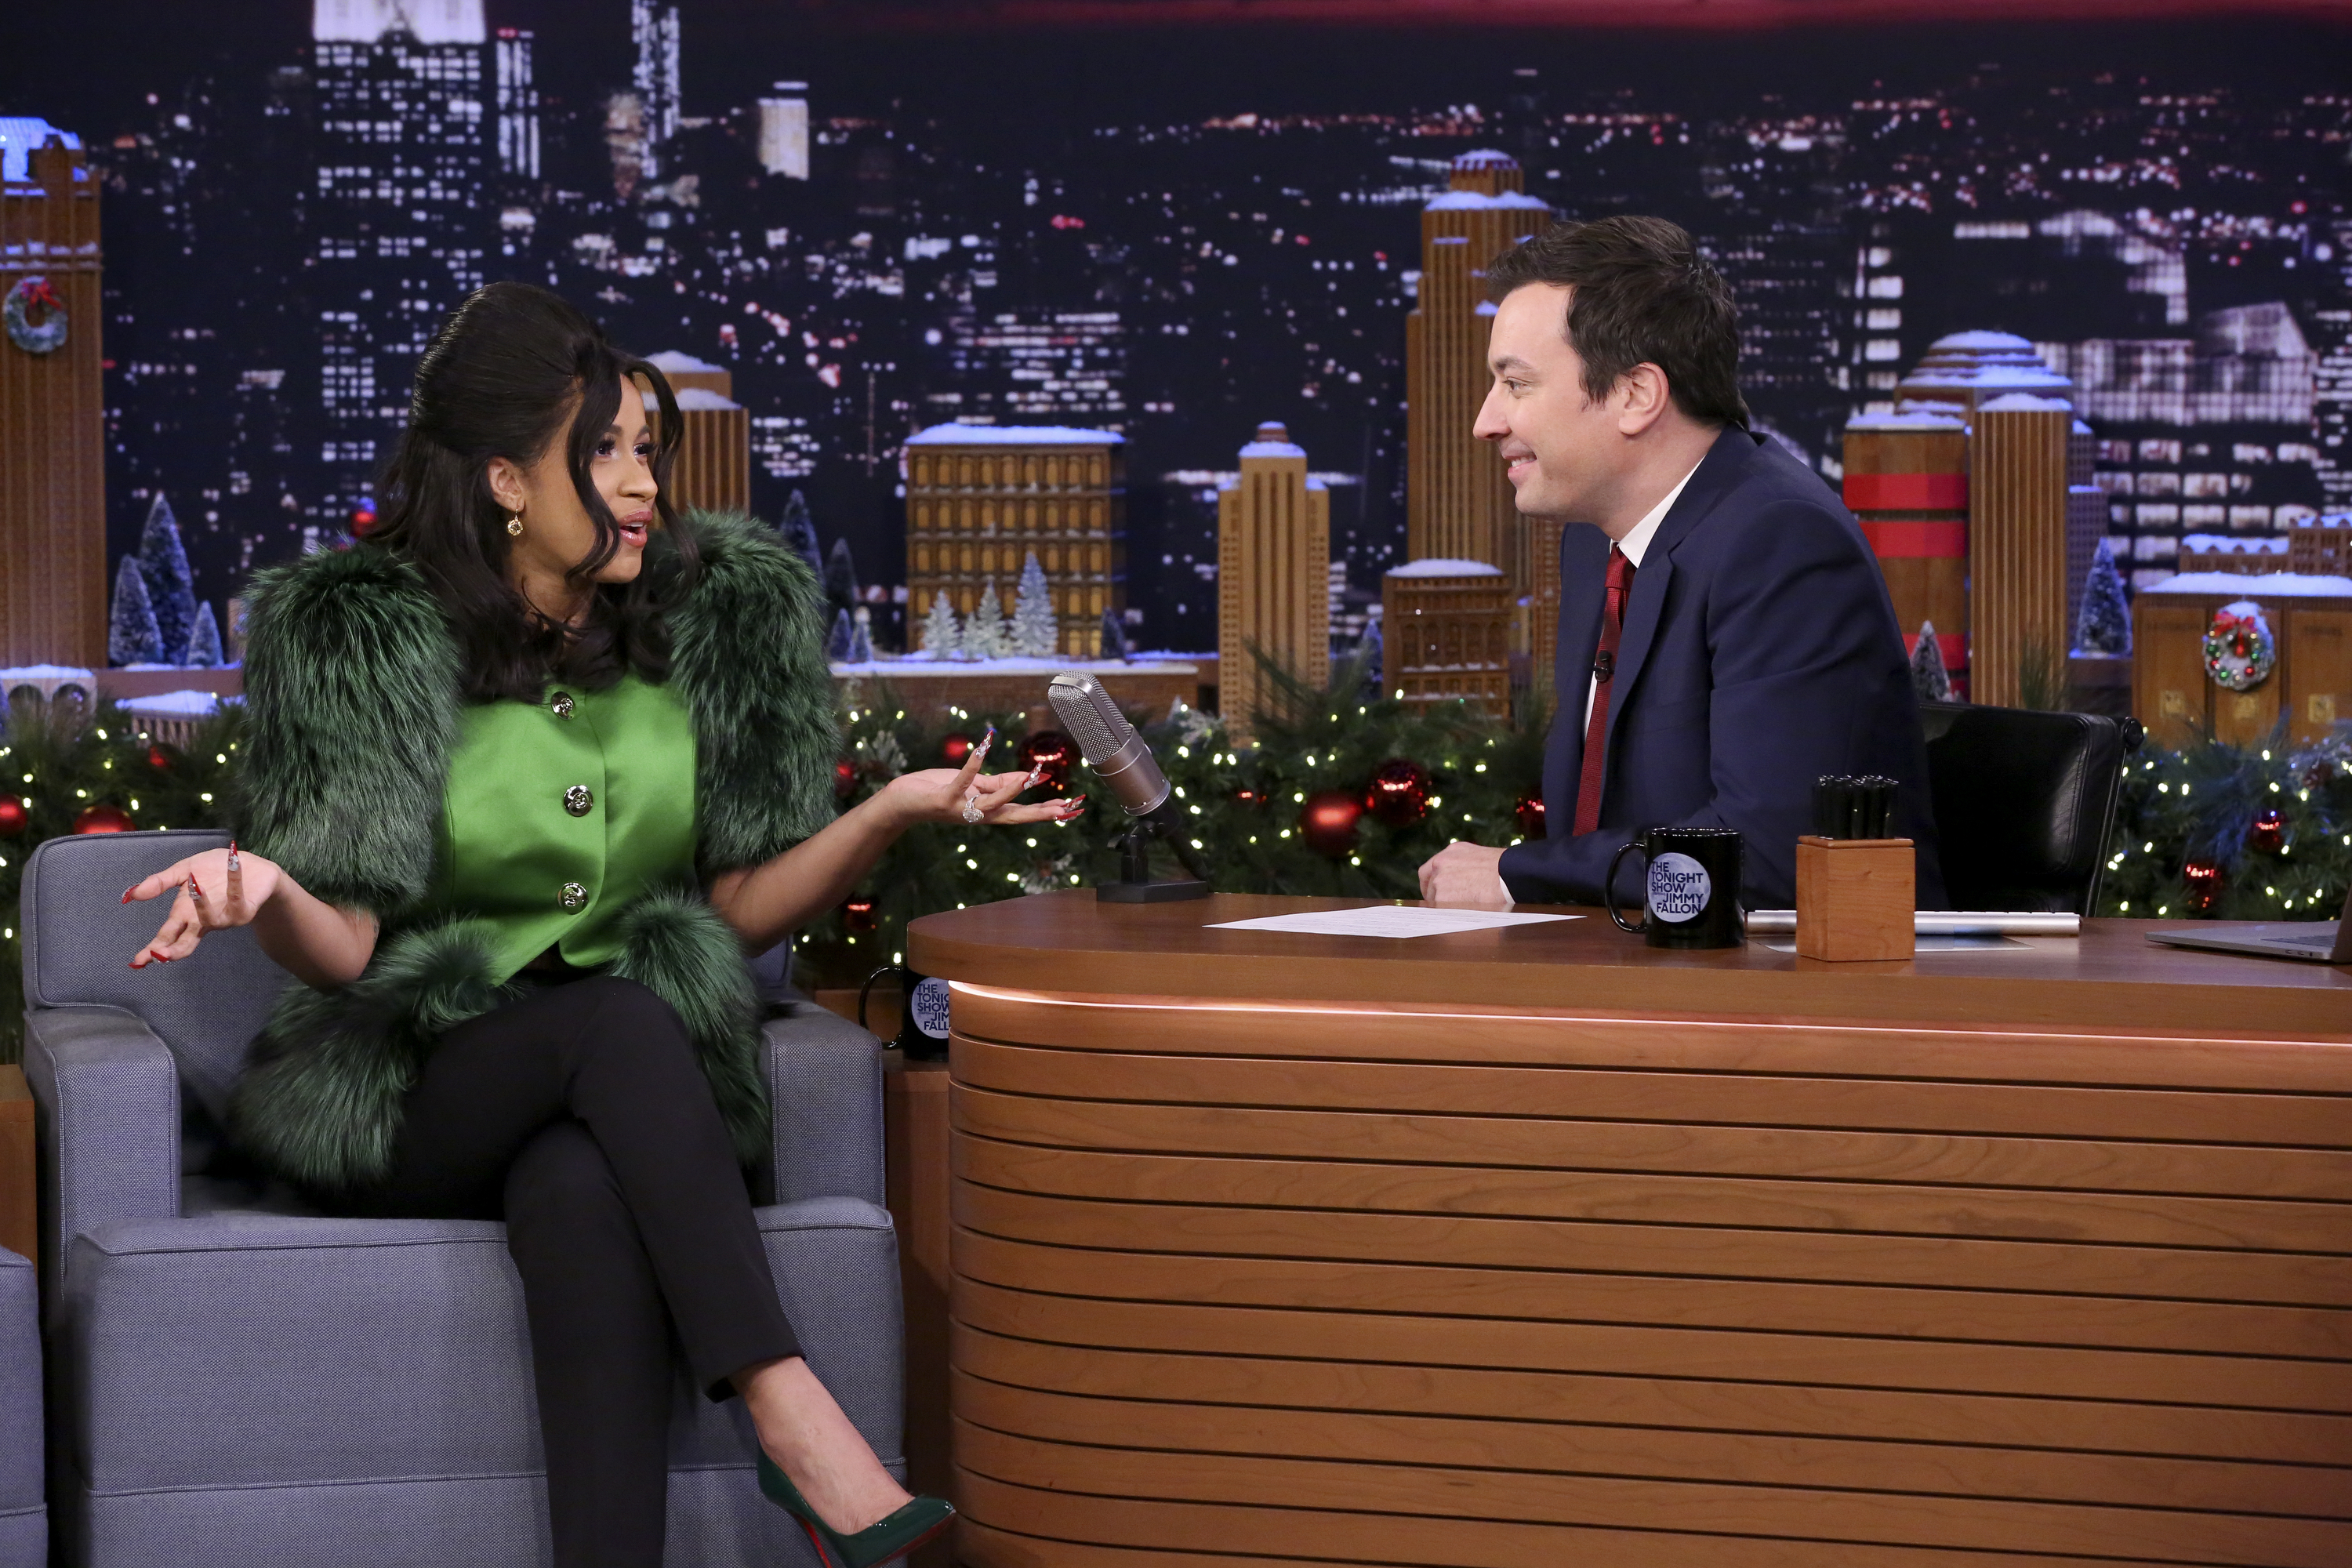 THE TONIGHT SHOW STARRING JIMMY FALLON -- Episode 0794 -- Pictured: (l-r) Hip Hop Artist Cardi B during an interview with his Jimmy Fallon on December 20, 2017 -- (Photo by: Andrew Lipovsky/NBC/NBCU Photo Bank via Getty Images) (NBC&mdash;NBCU Photo Bank via Getty Images)